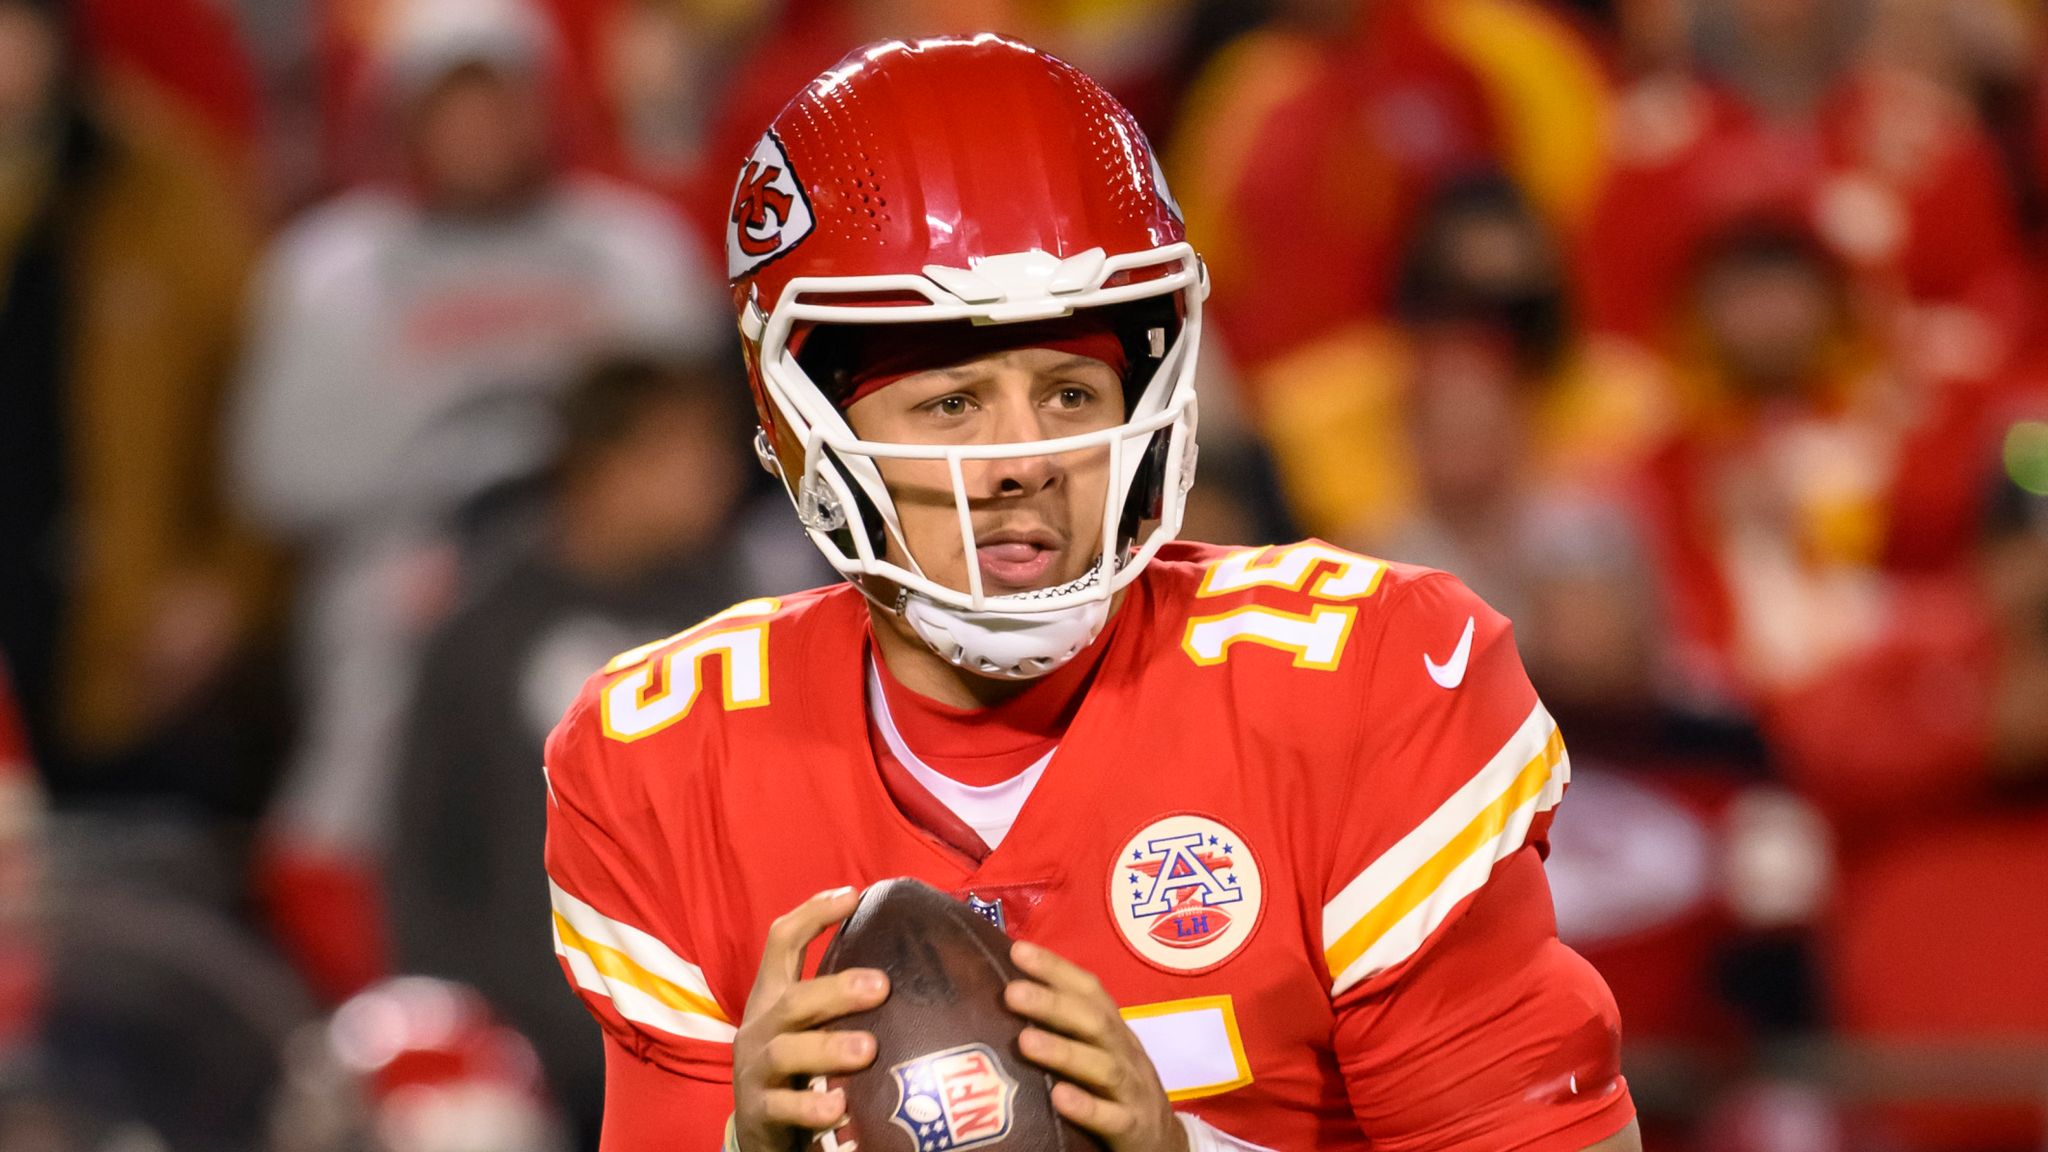 Patrick Mahomes and the Chiefs are evolving … a scary thing for